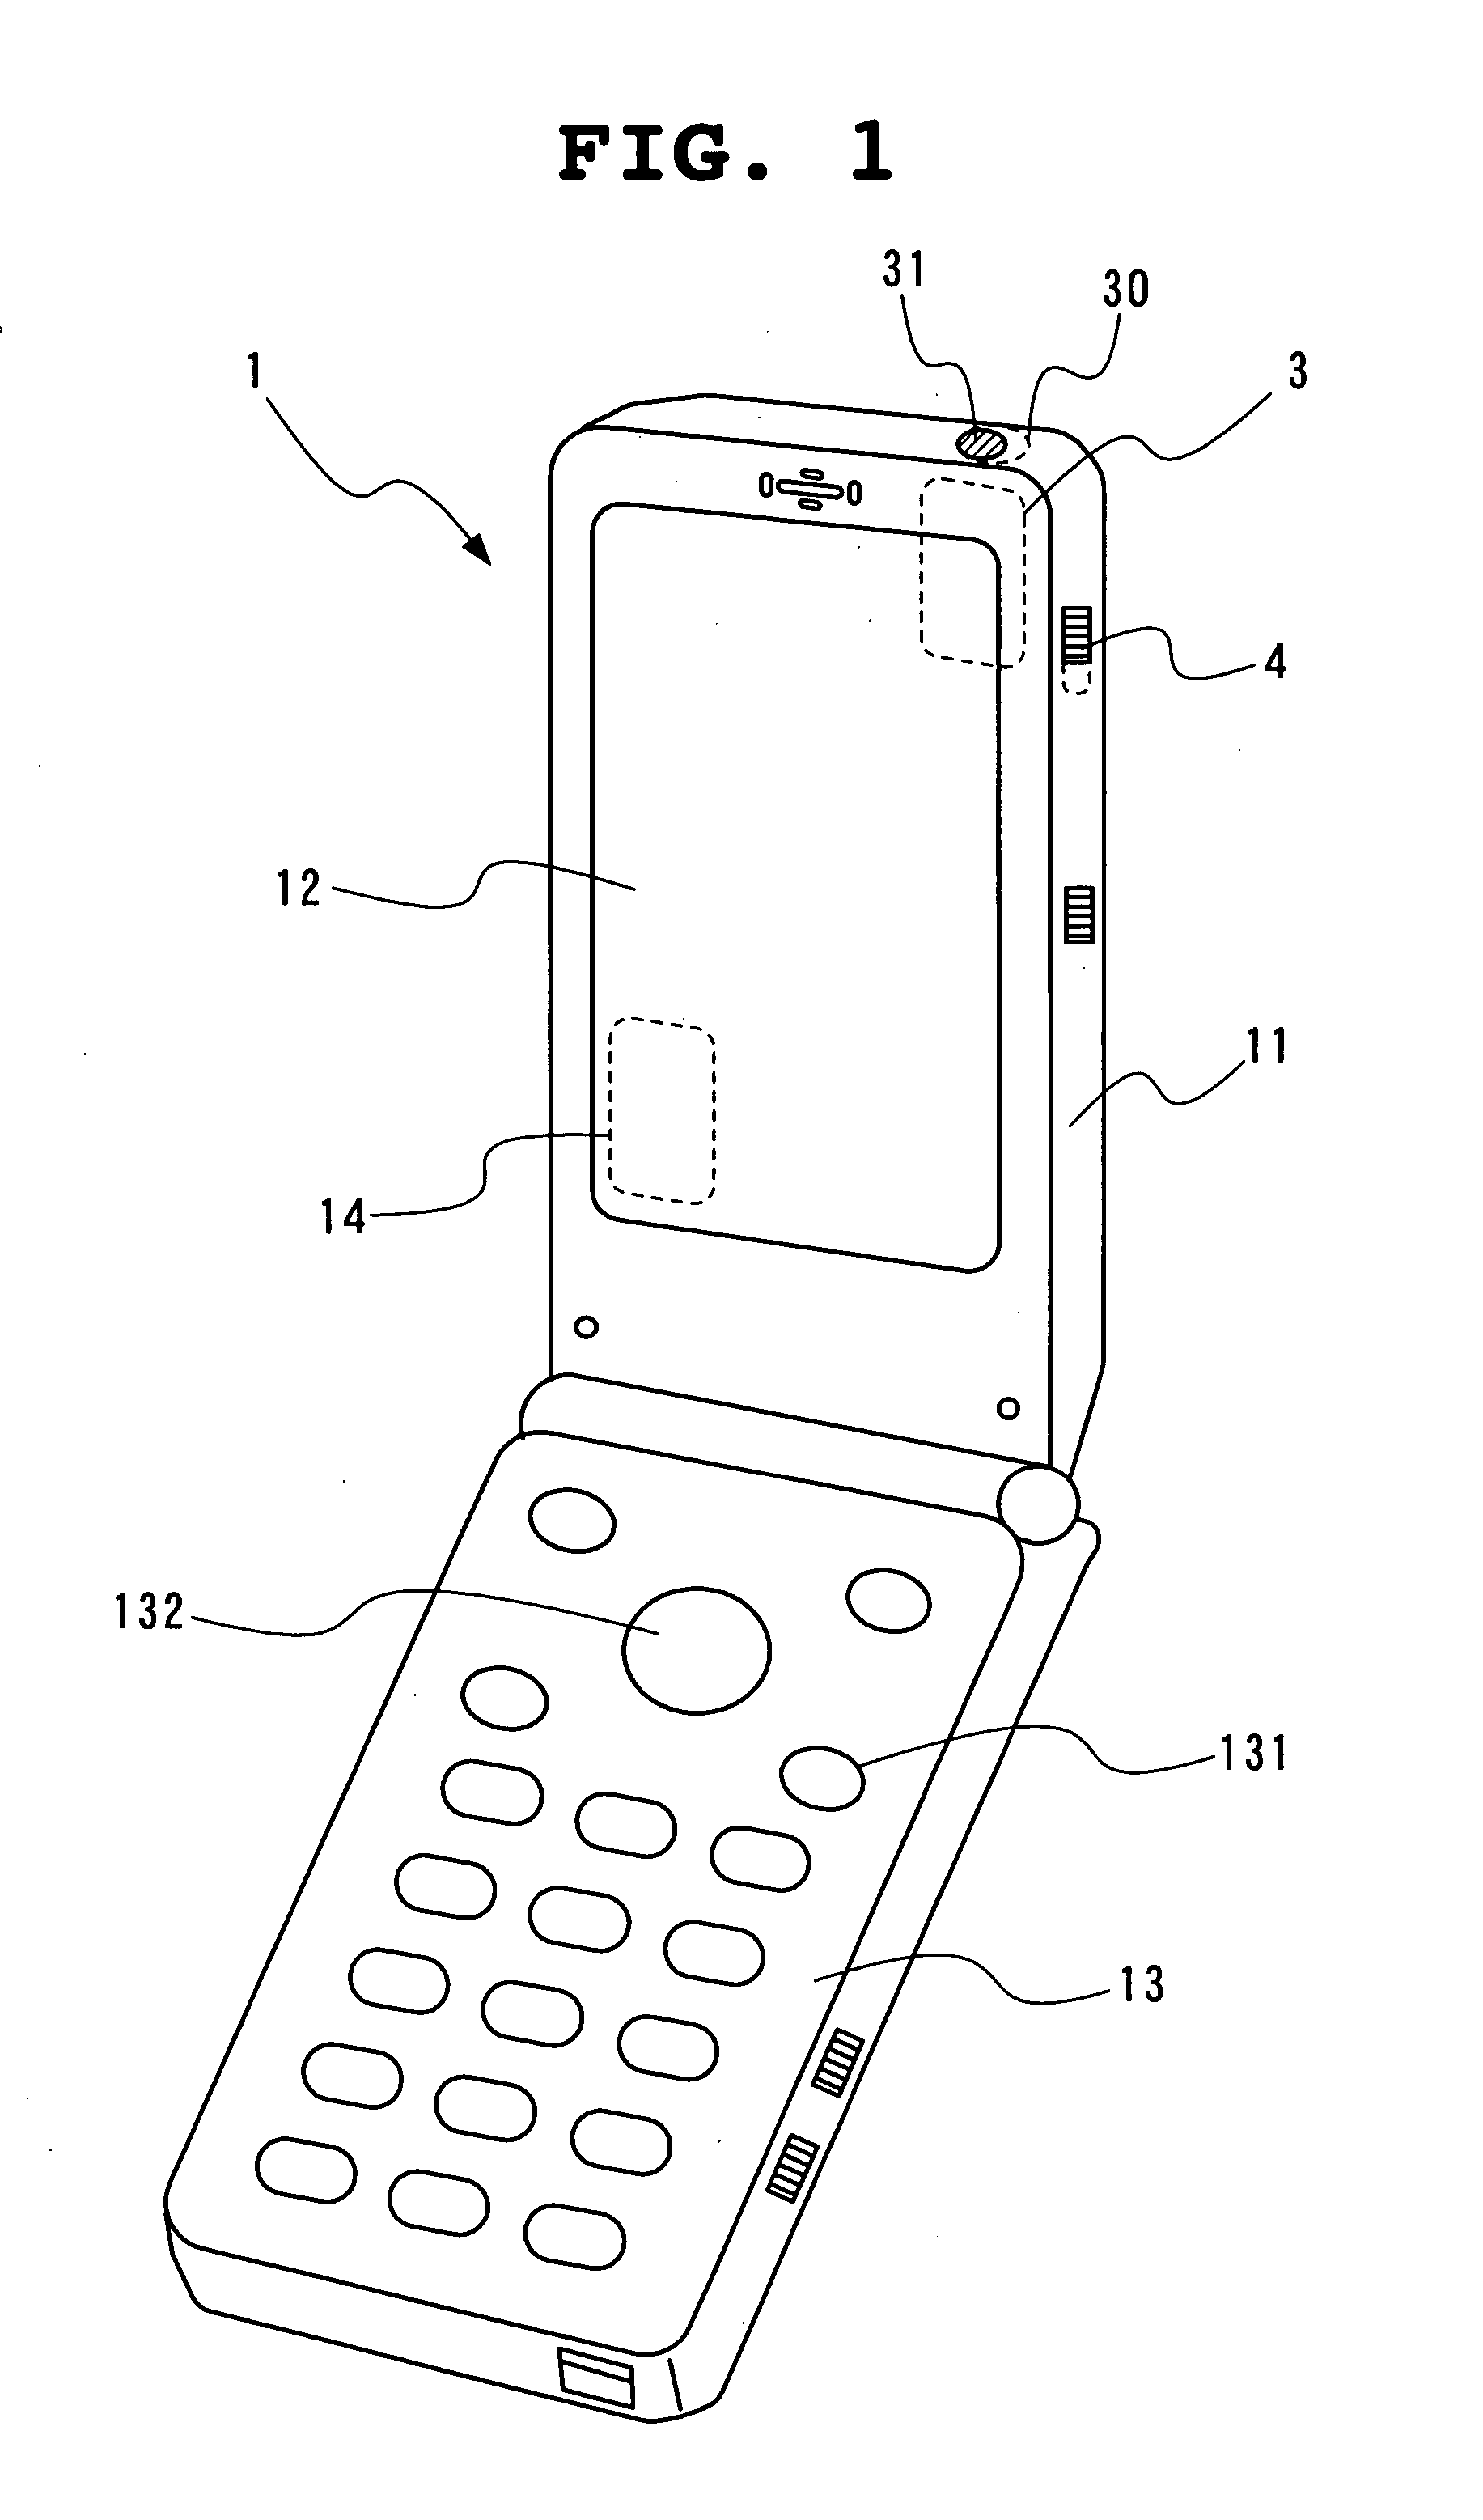 Portable electronic equipment with integrated lighter